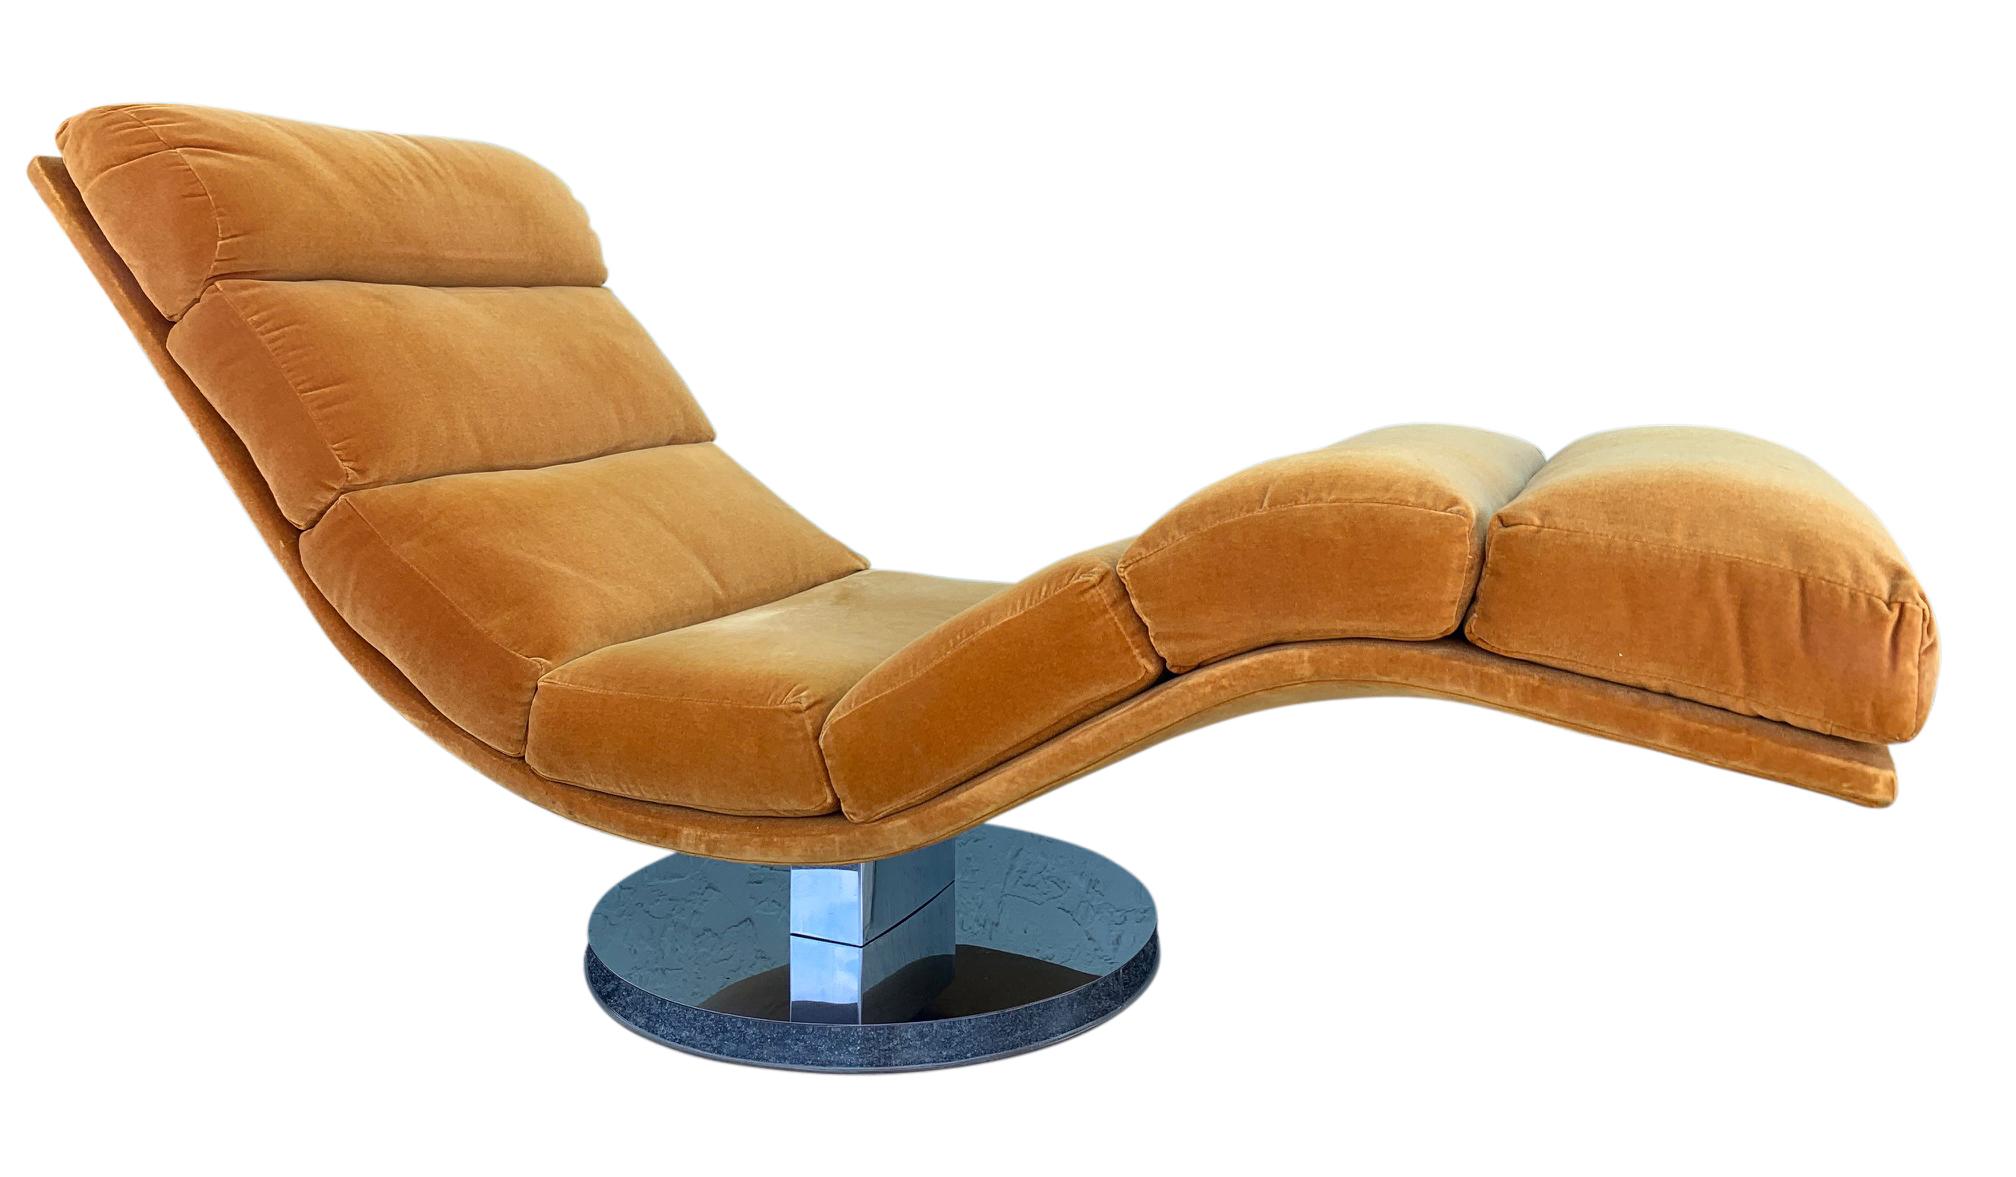 Swivel rocking wave chaise lounge by Milo Baughman for Thayer Coggin with polished aluminum base. Mid-Century Modern.